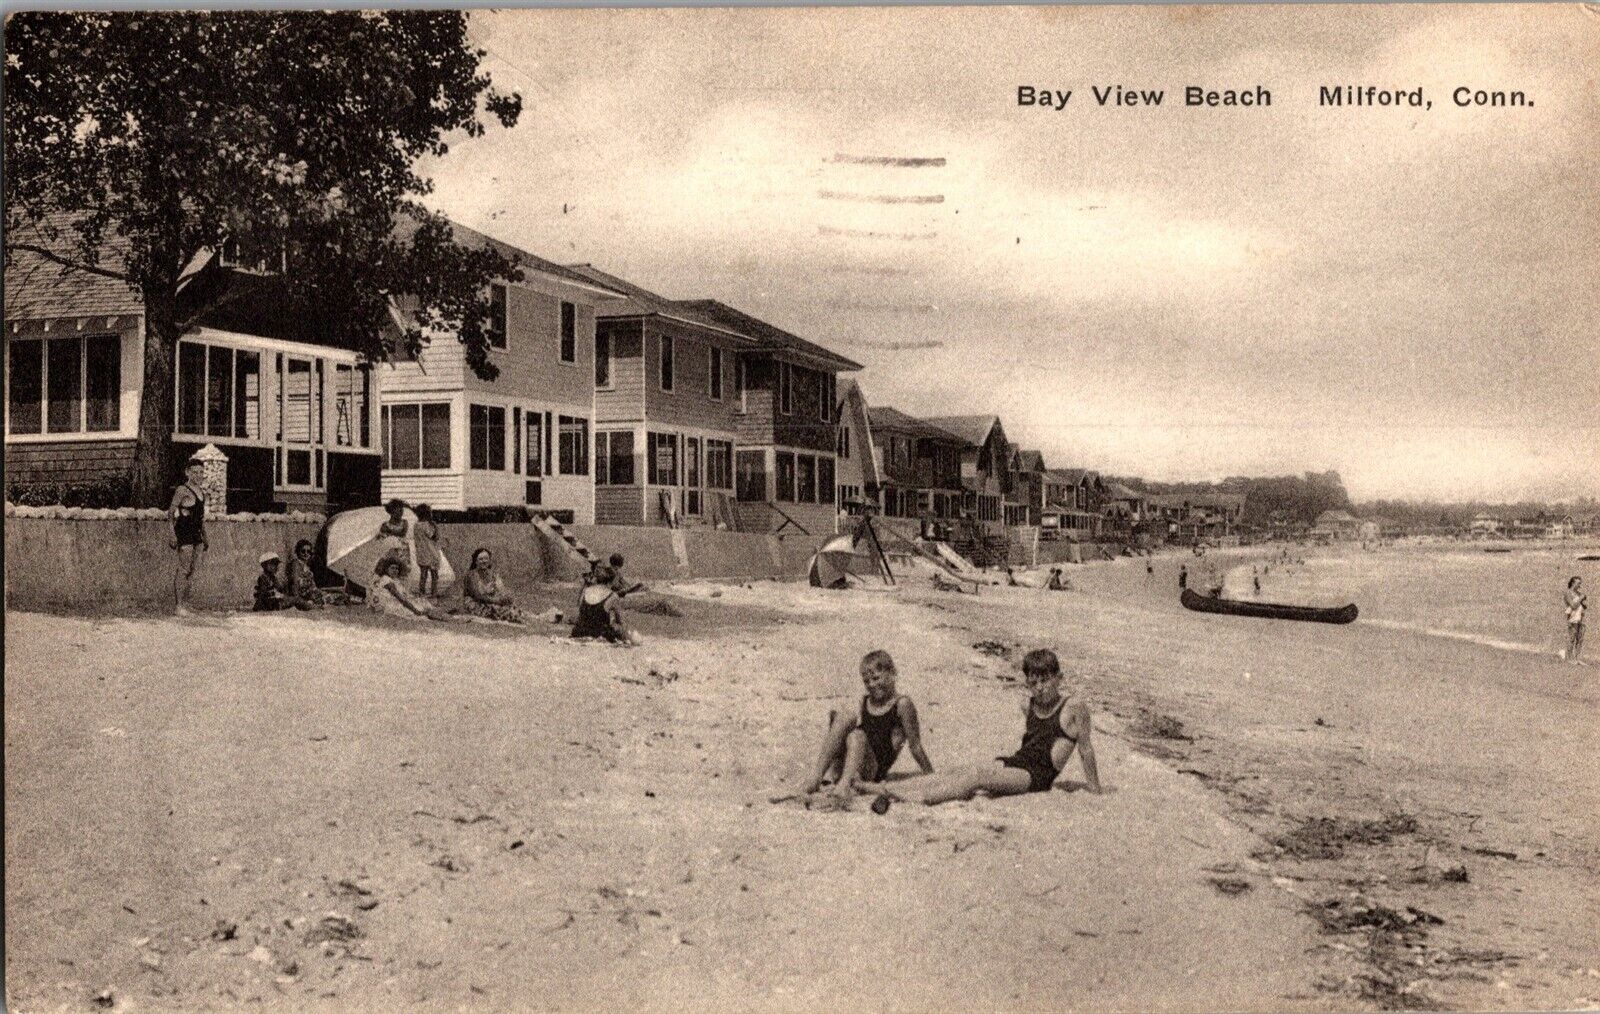 Cottages at Bay View Beach Milford CT c1937 Vintage Postcard M76